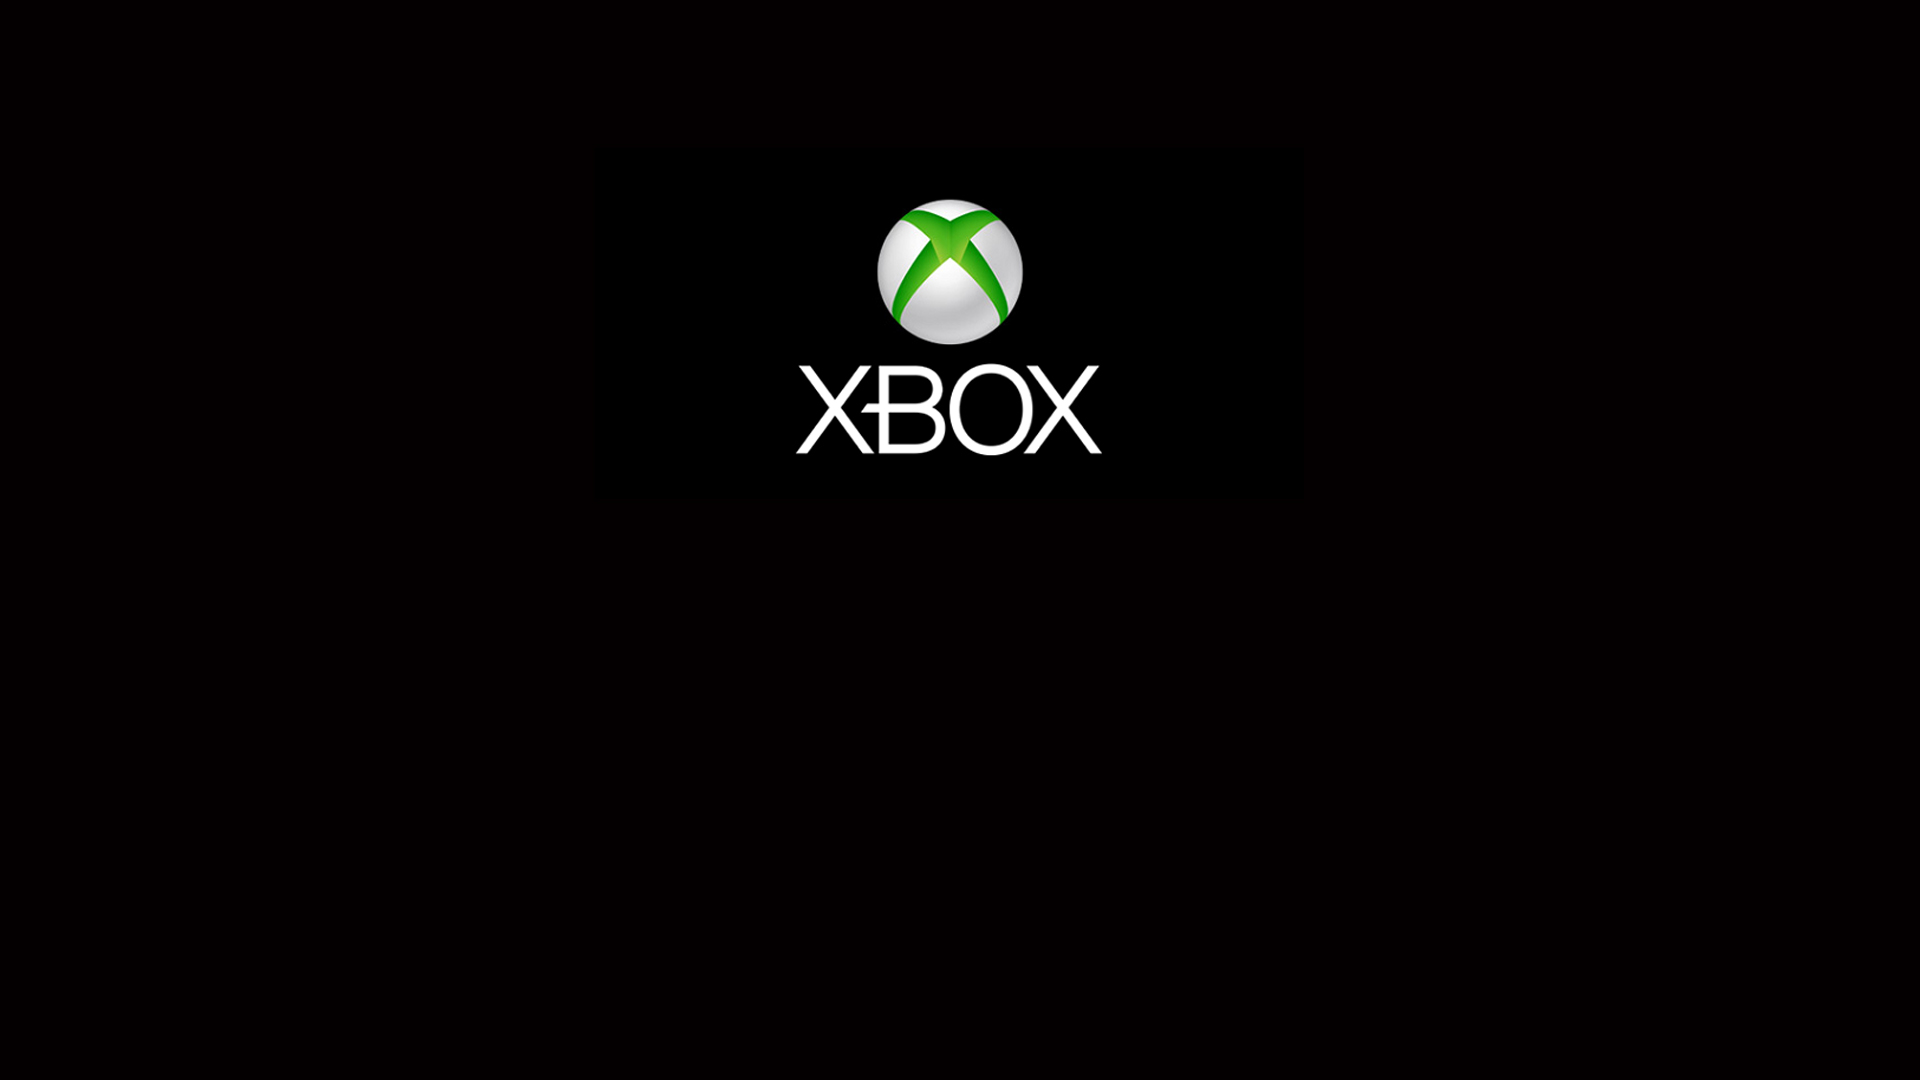 File Name 921138 HD Xbox Wallpapers Download Free   921138